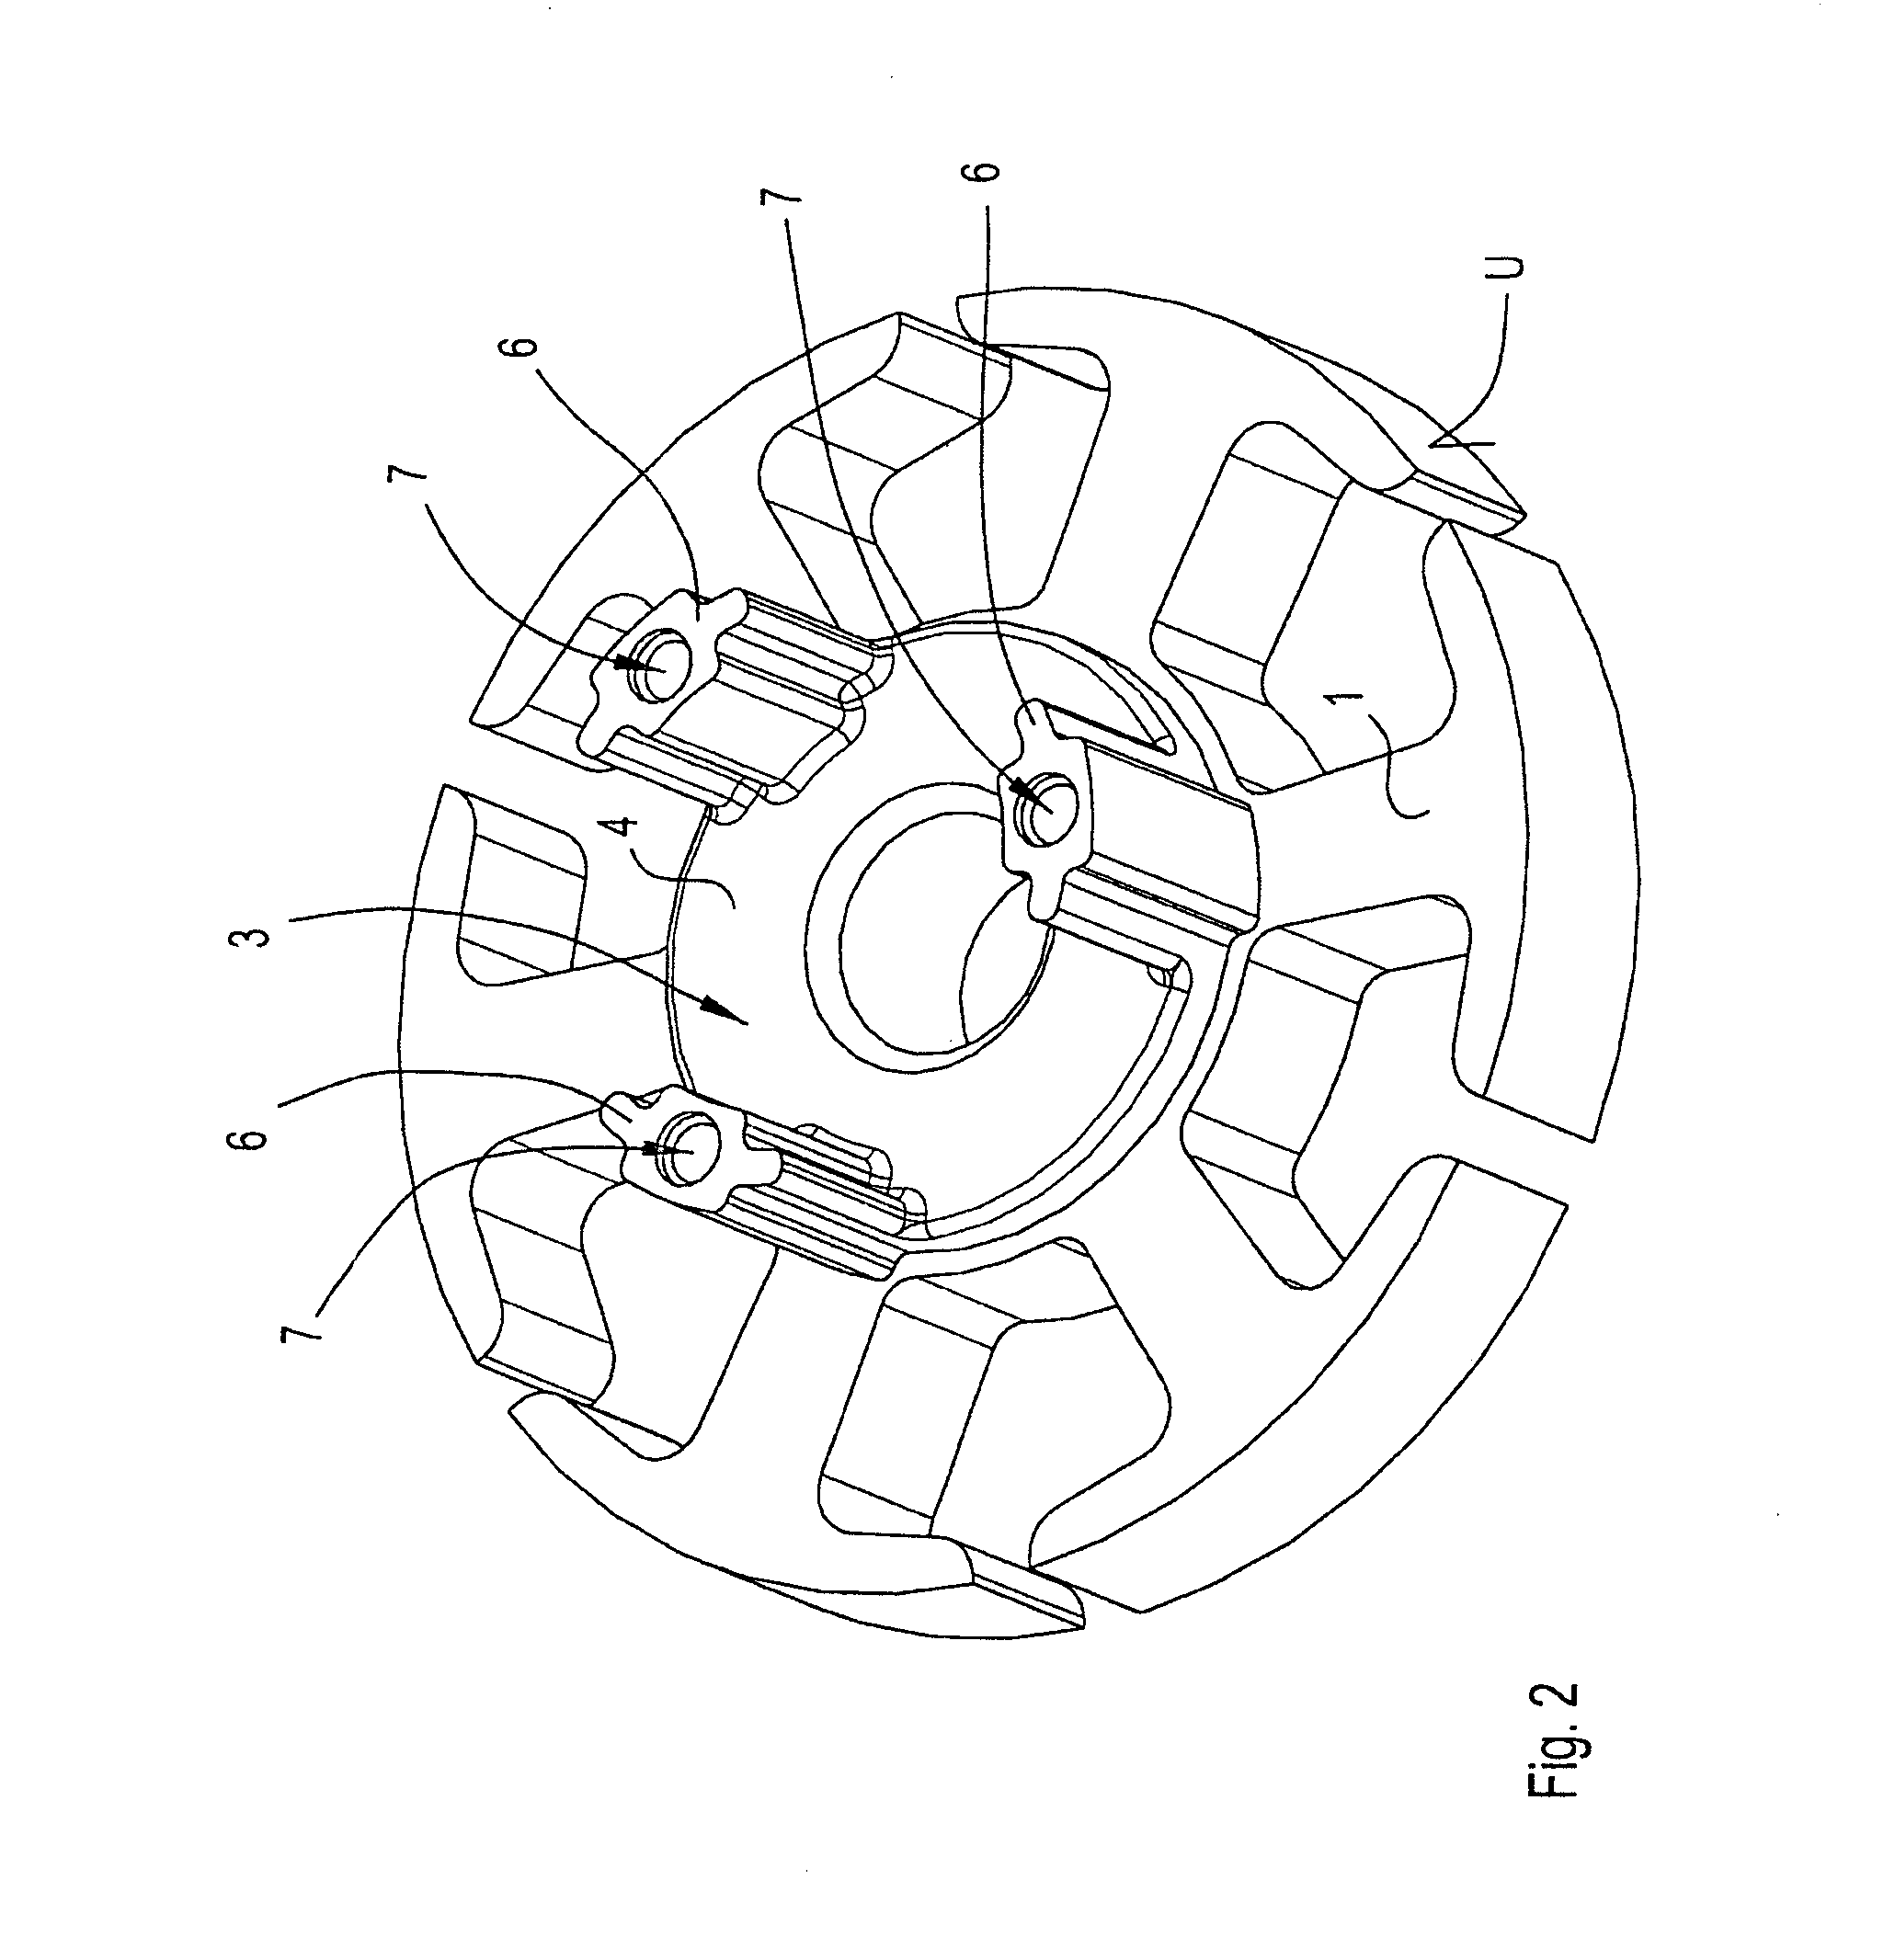 Stator of an electric motor